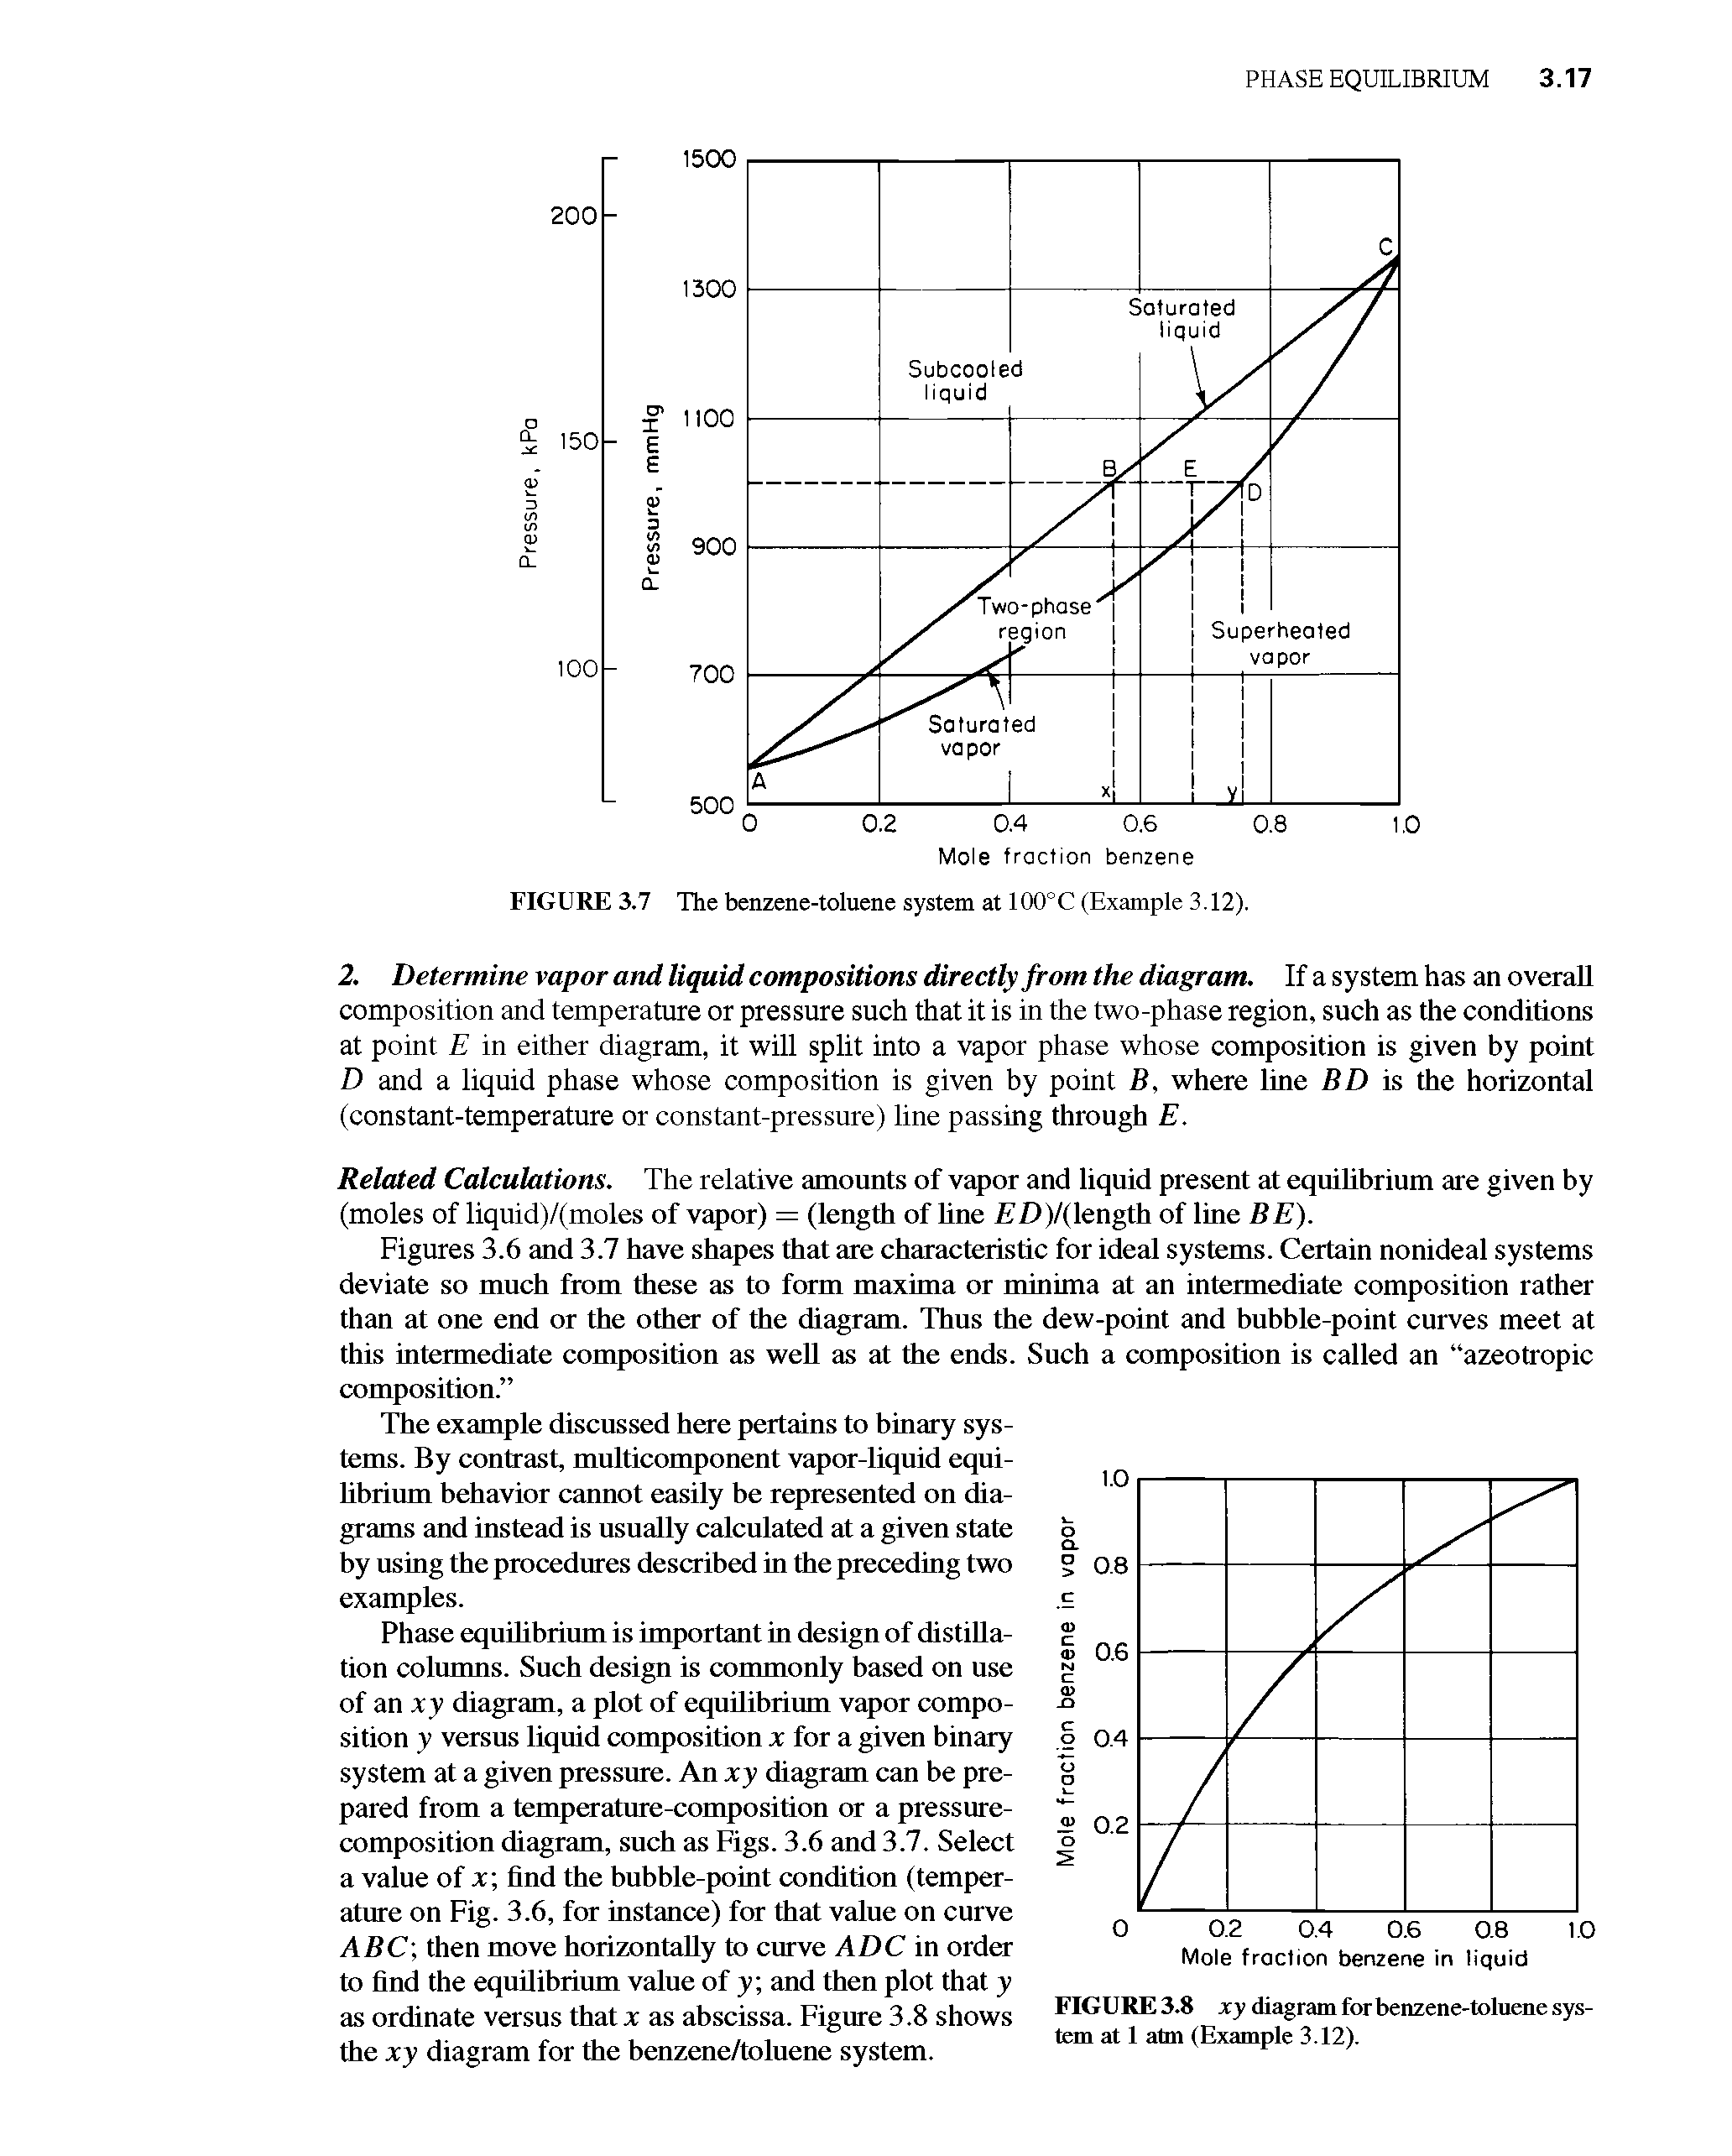 Figures 3.6 and 3.7 have shapes that are characteristic for ideal systems. Certain nonideal systems deviate so much from these as to form maxima or minima at an intermediate composition rather than at one end or the other of the diagram. Thus the dew-point and bubble-point curves meet at this intermediate composition as well as at the ends. Such a composition is called an azeotropic composition. ...